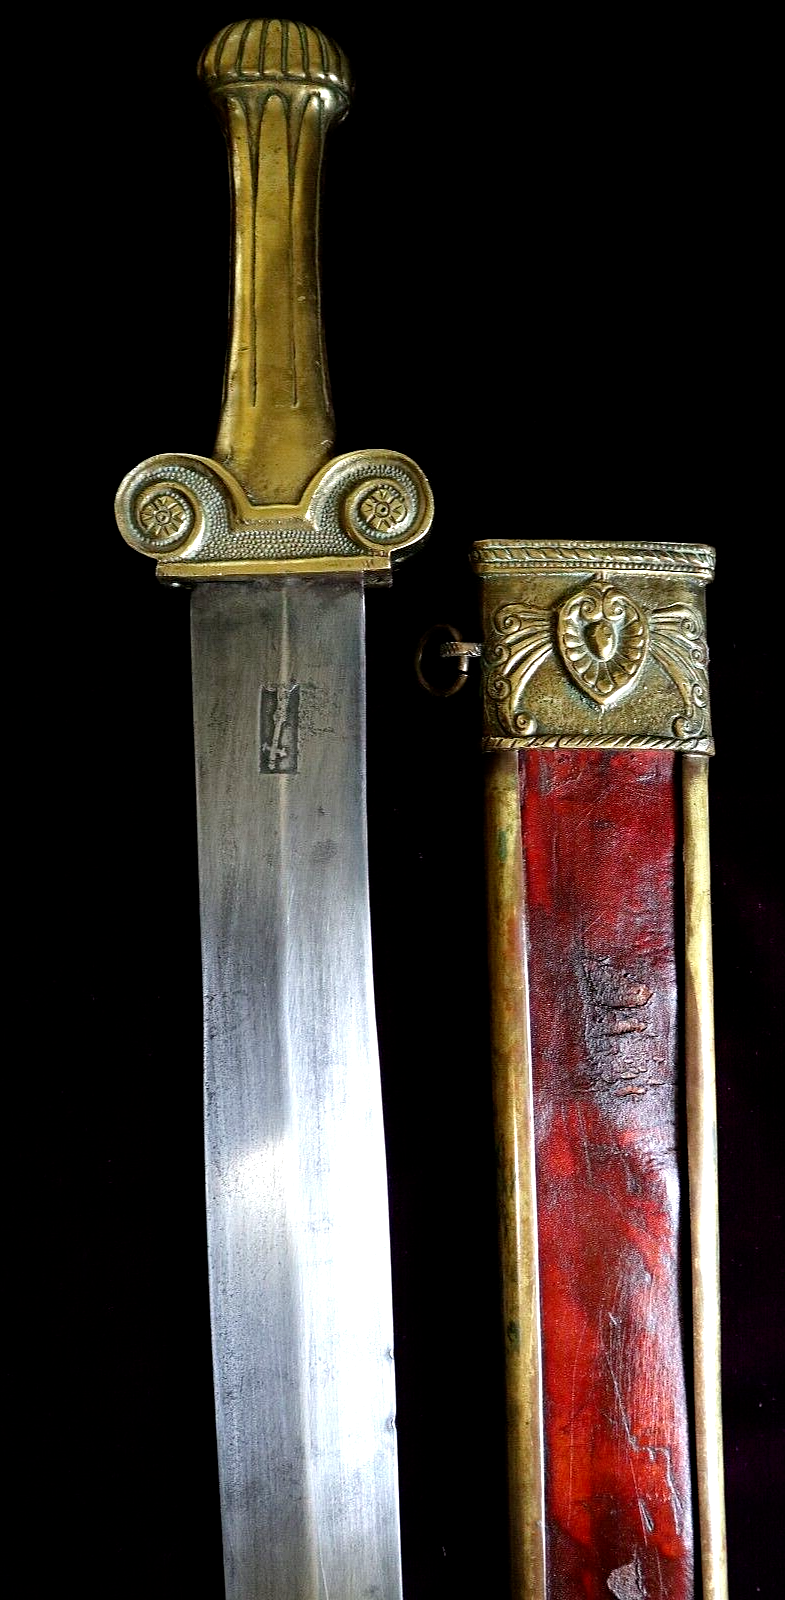 NAPOLEONIC FRENCH SWORD COUNSULAR PERIOD GIVEN TO MEMBERS OF COUNCIL CIRCA 1795